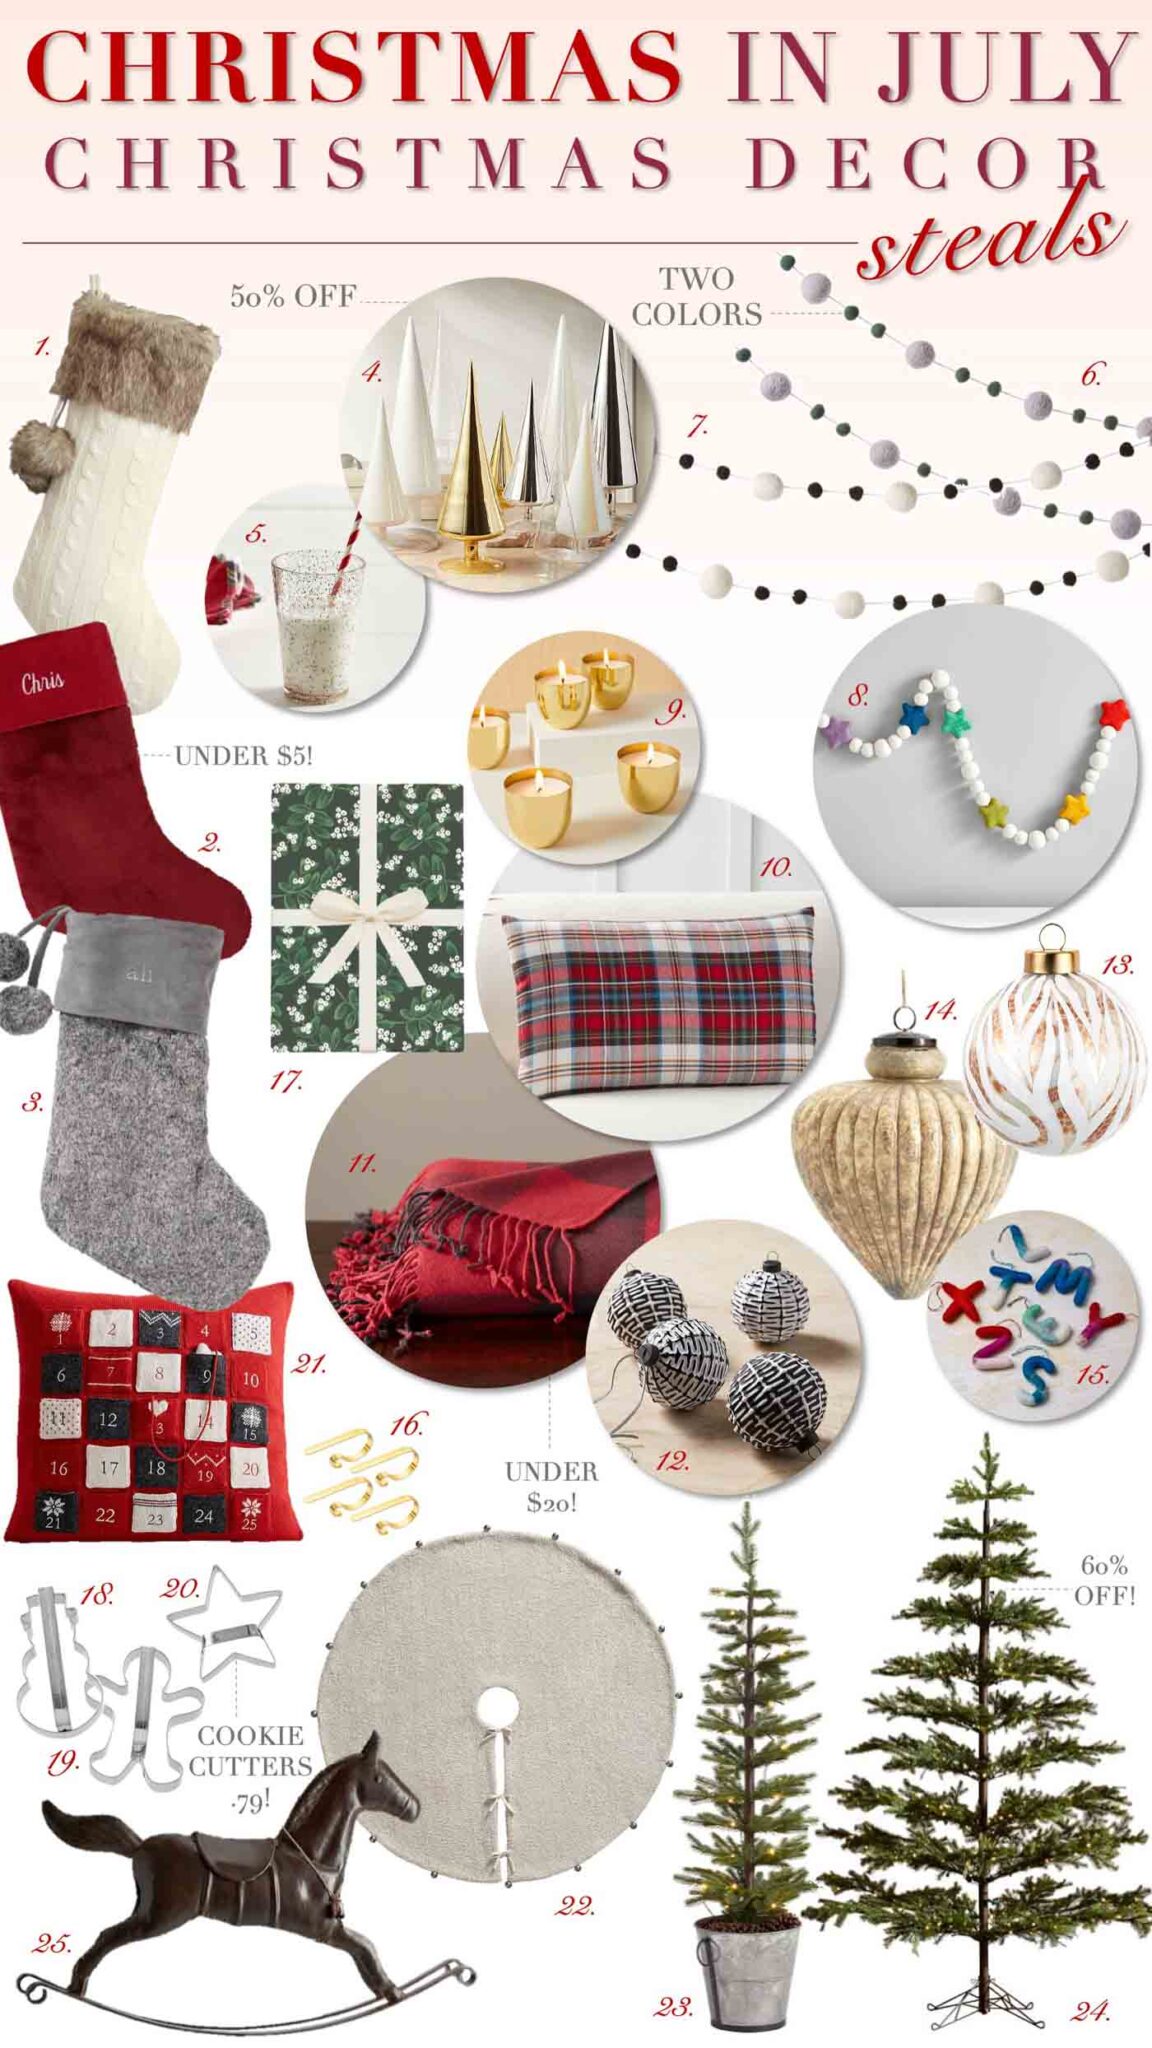 Christmas in July Sales and Discounts for Holiday Decor Kelley Nan